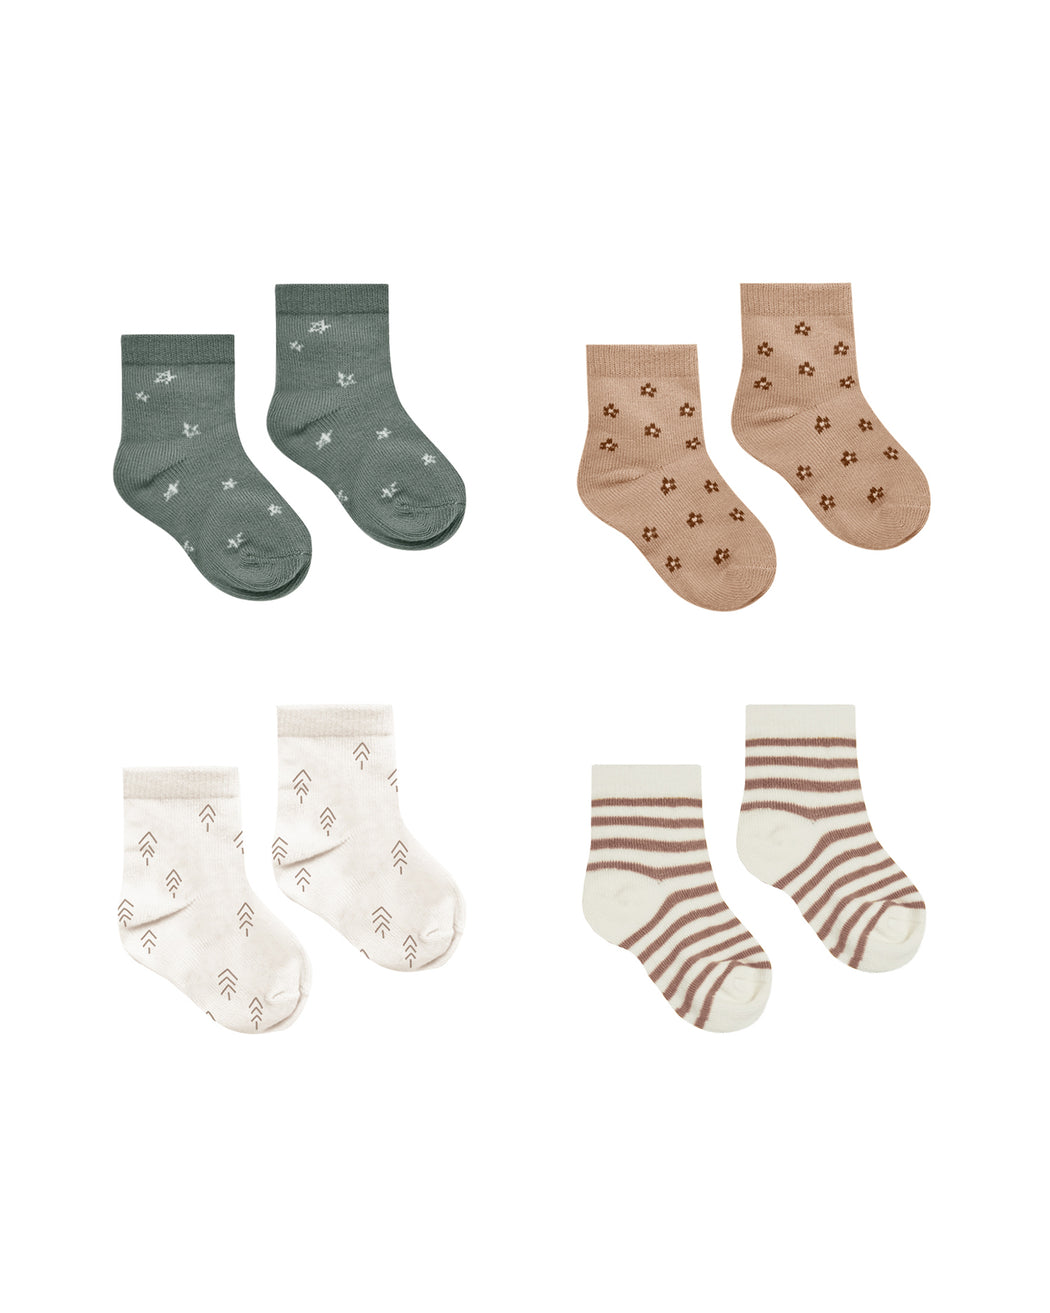 Printed Sock Set – Assorted Sets of Four